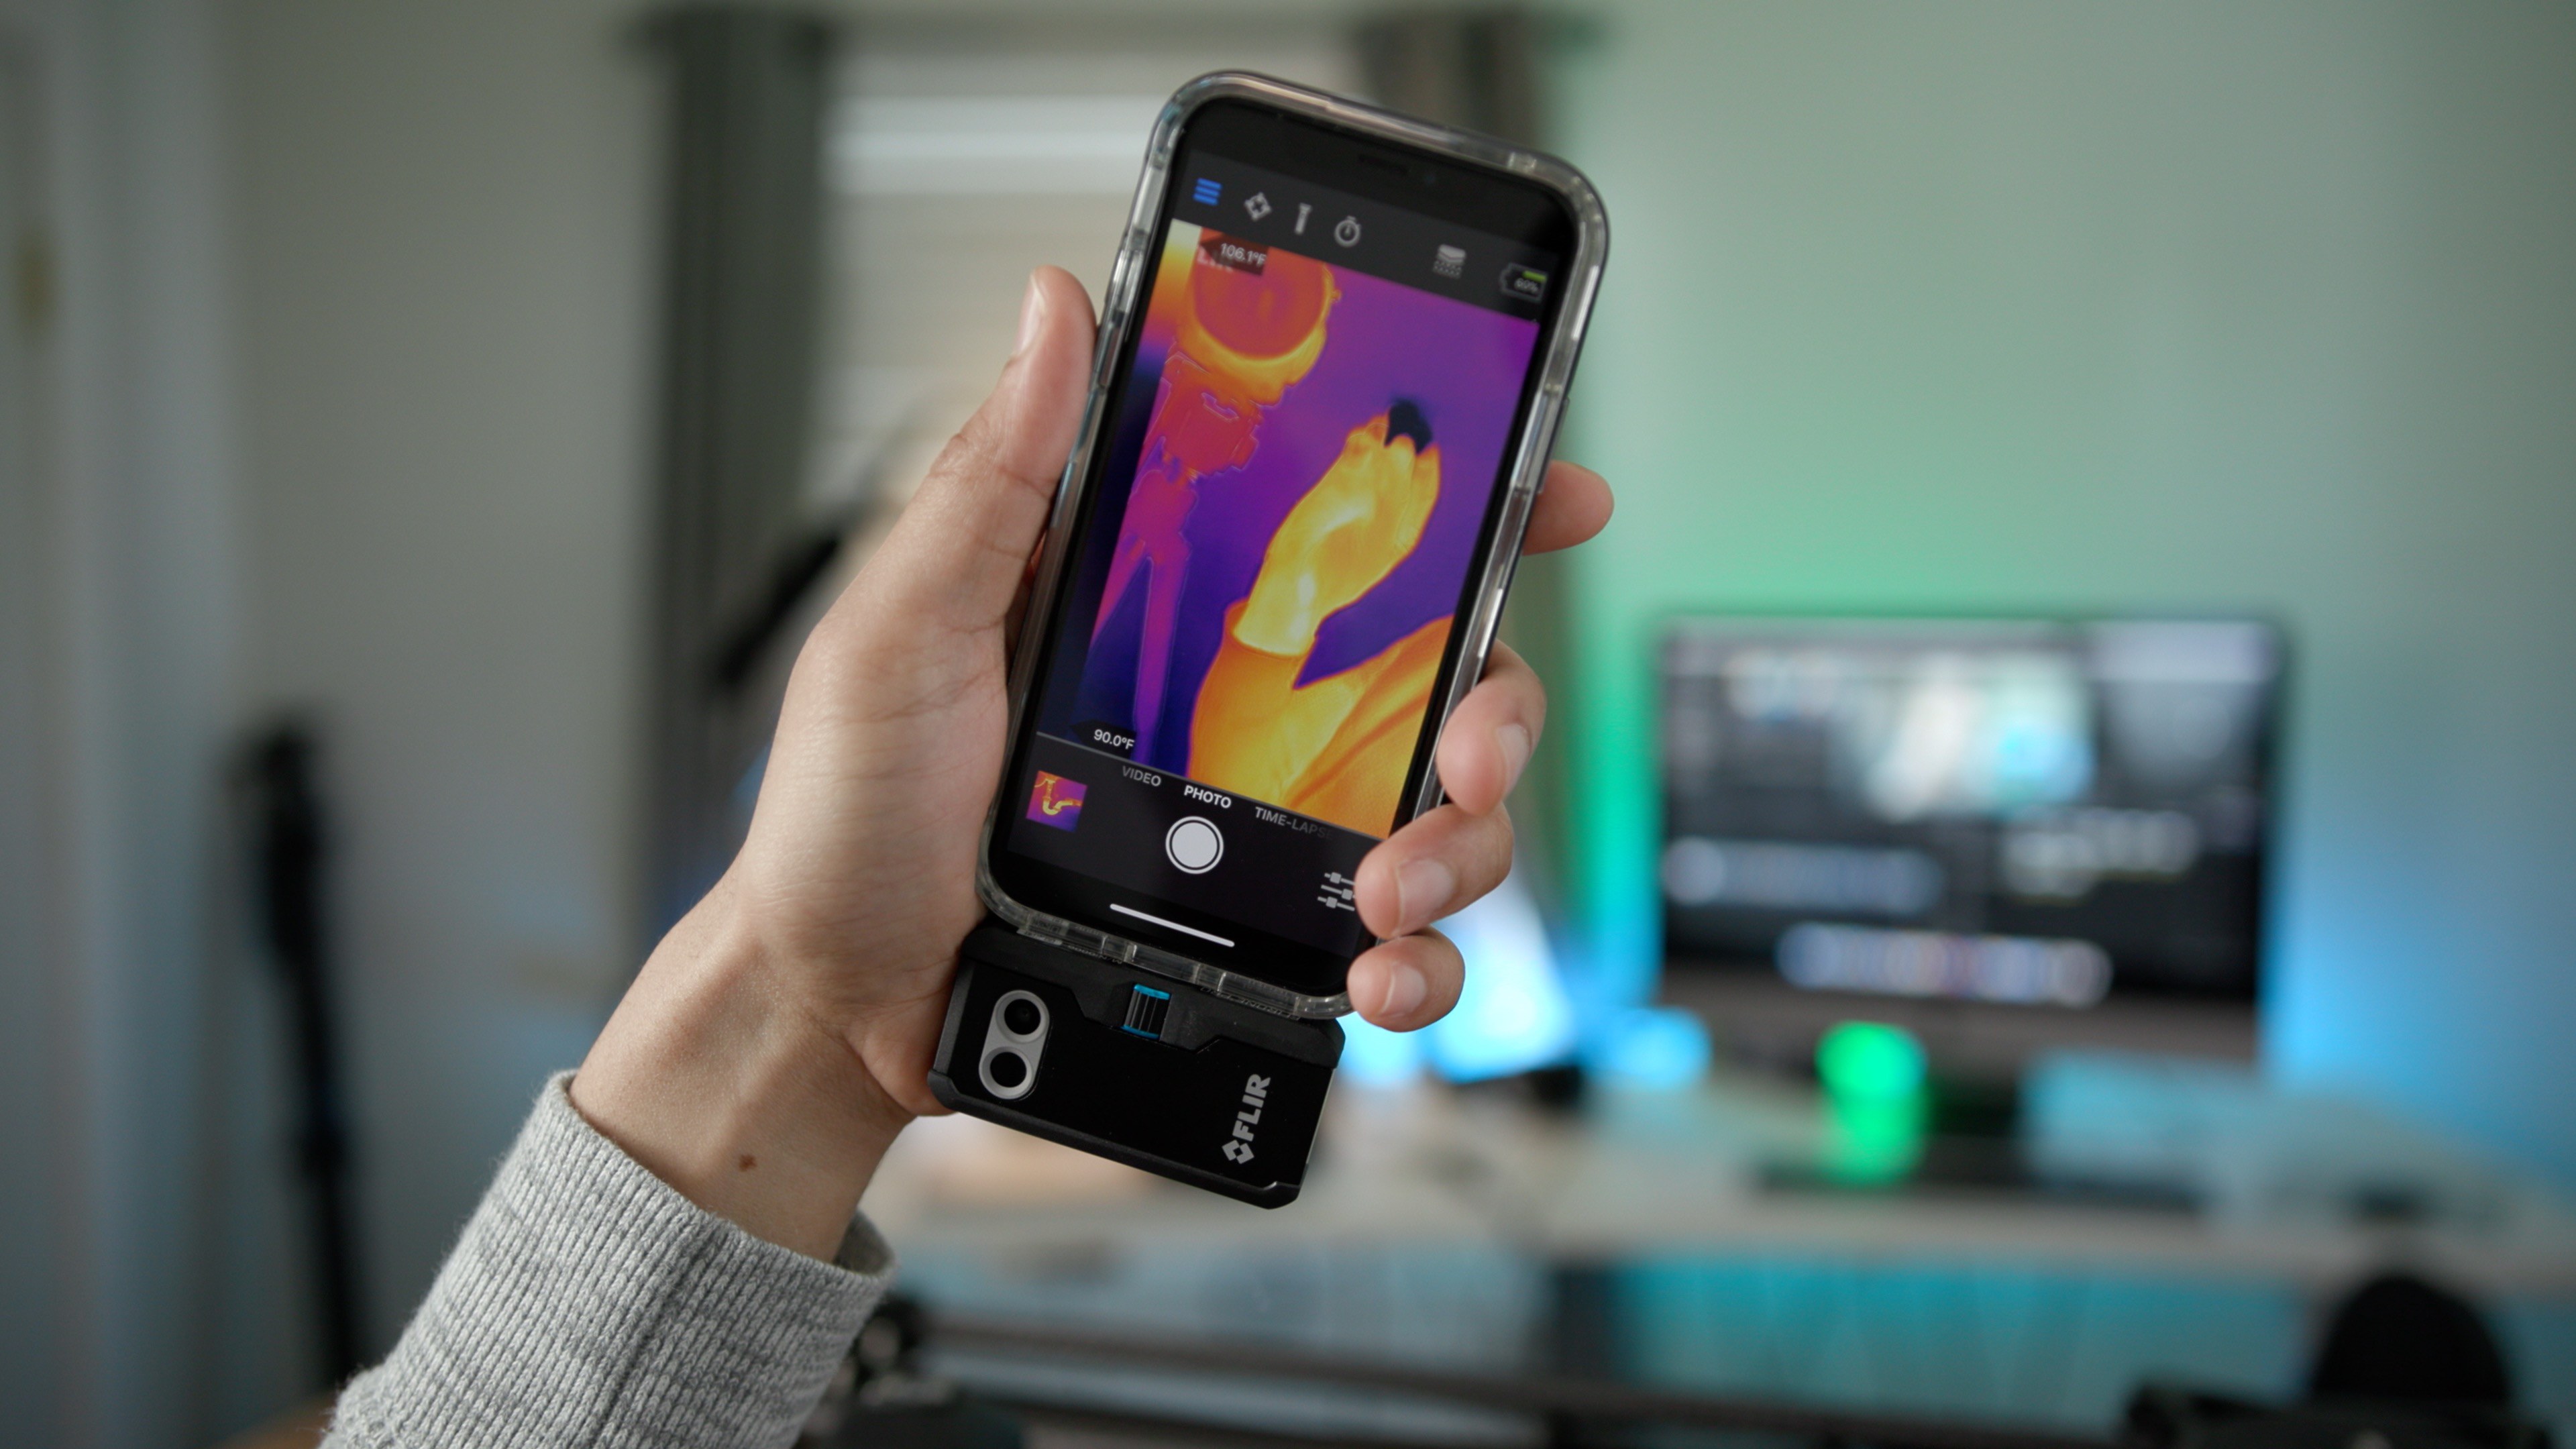 Hands-on: 'Flir One Pro' turns your iPhone into a thermal imaging camera  that's helpful for homeowners [Video] - 9to5Mac